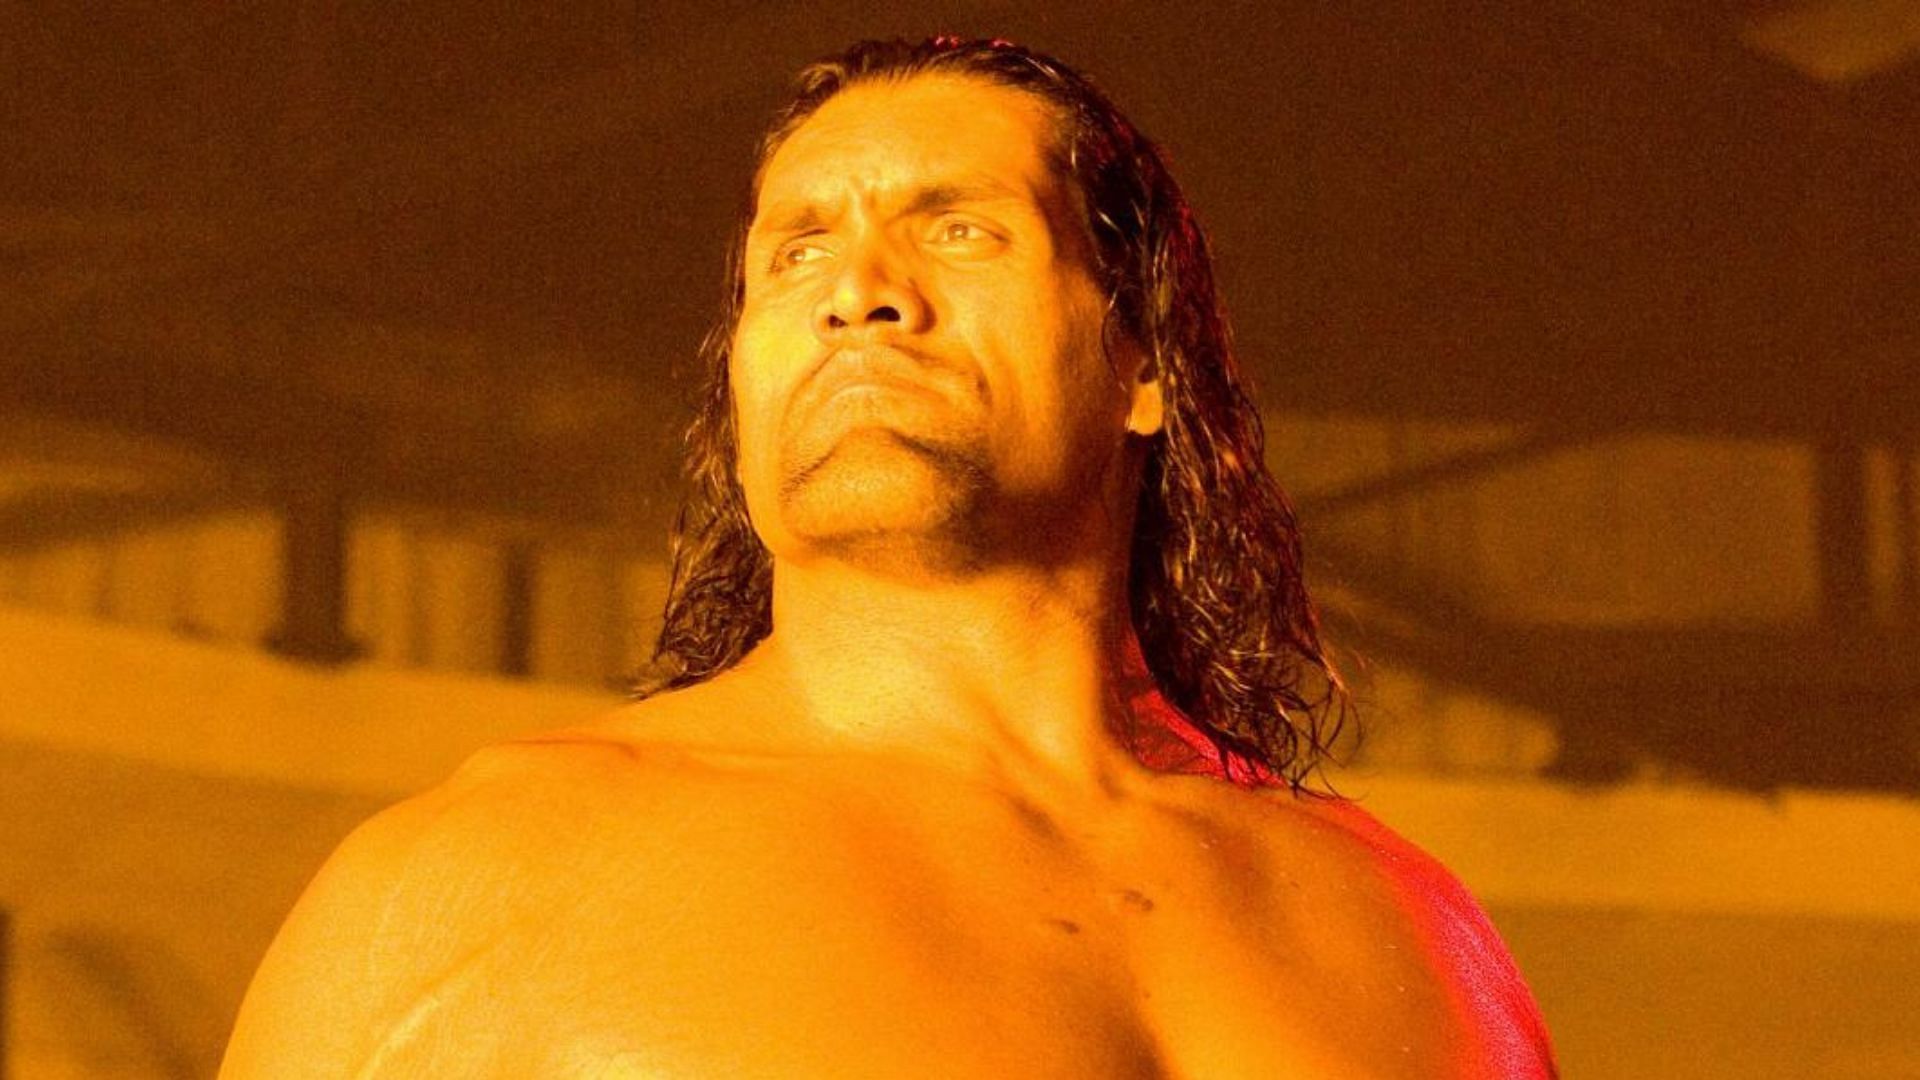 The Great Khali is a one-time WWE World Heavyweight Champion